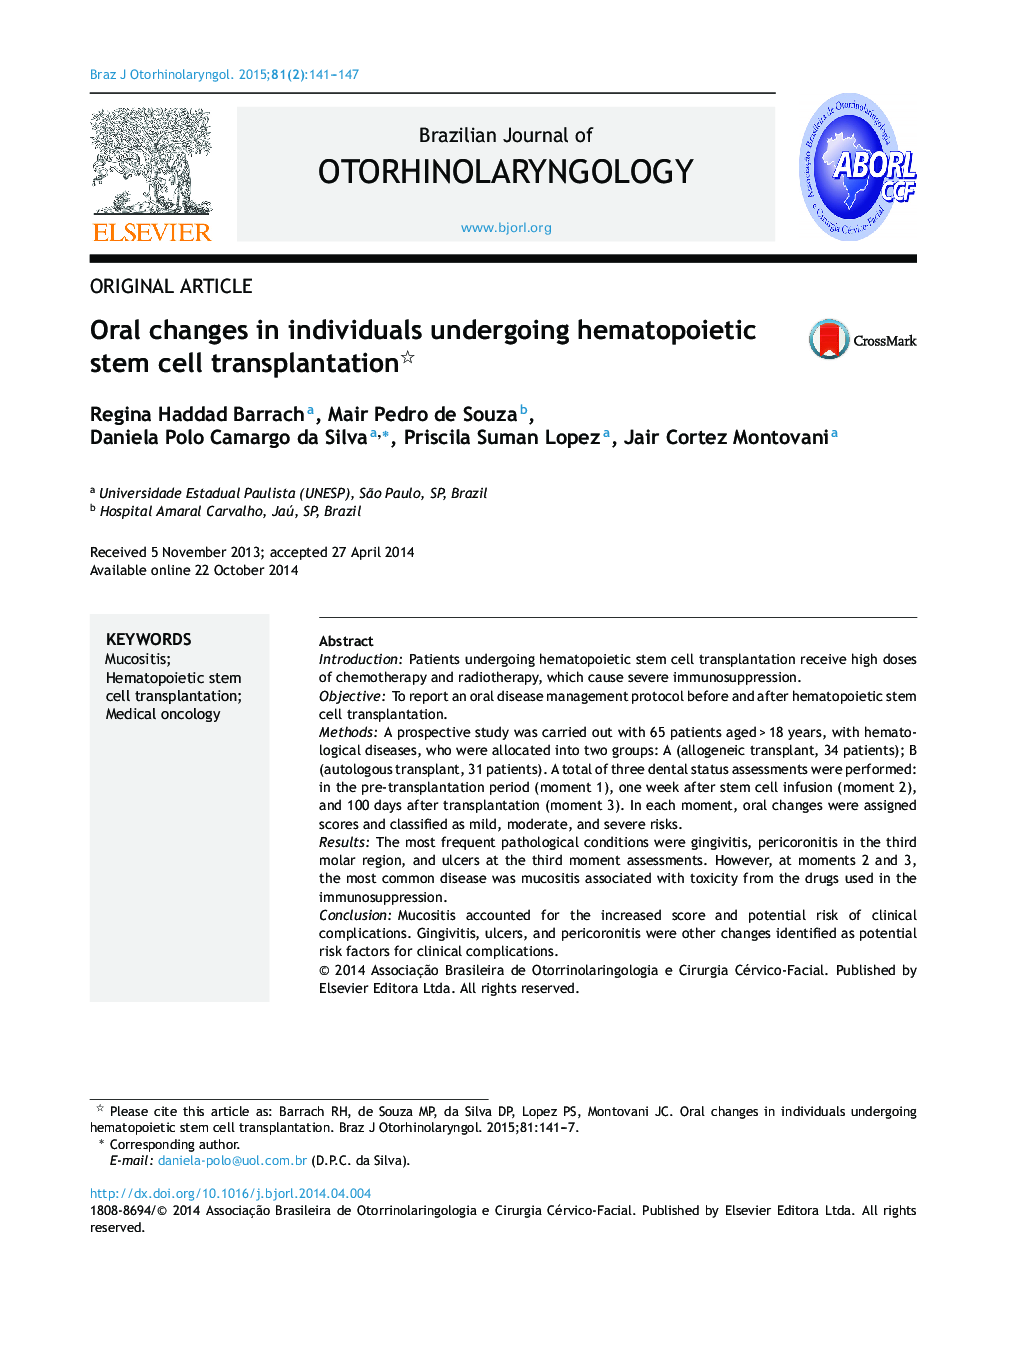 Oral changes in individuals undergoing hematopoietic stem cell transplantation 